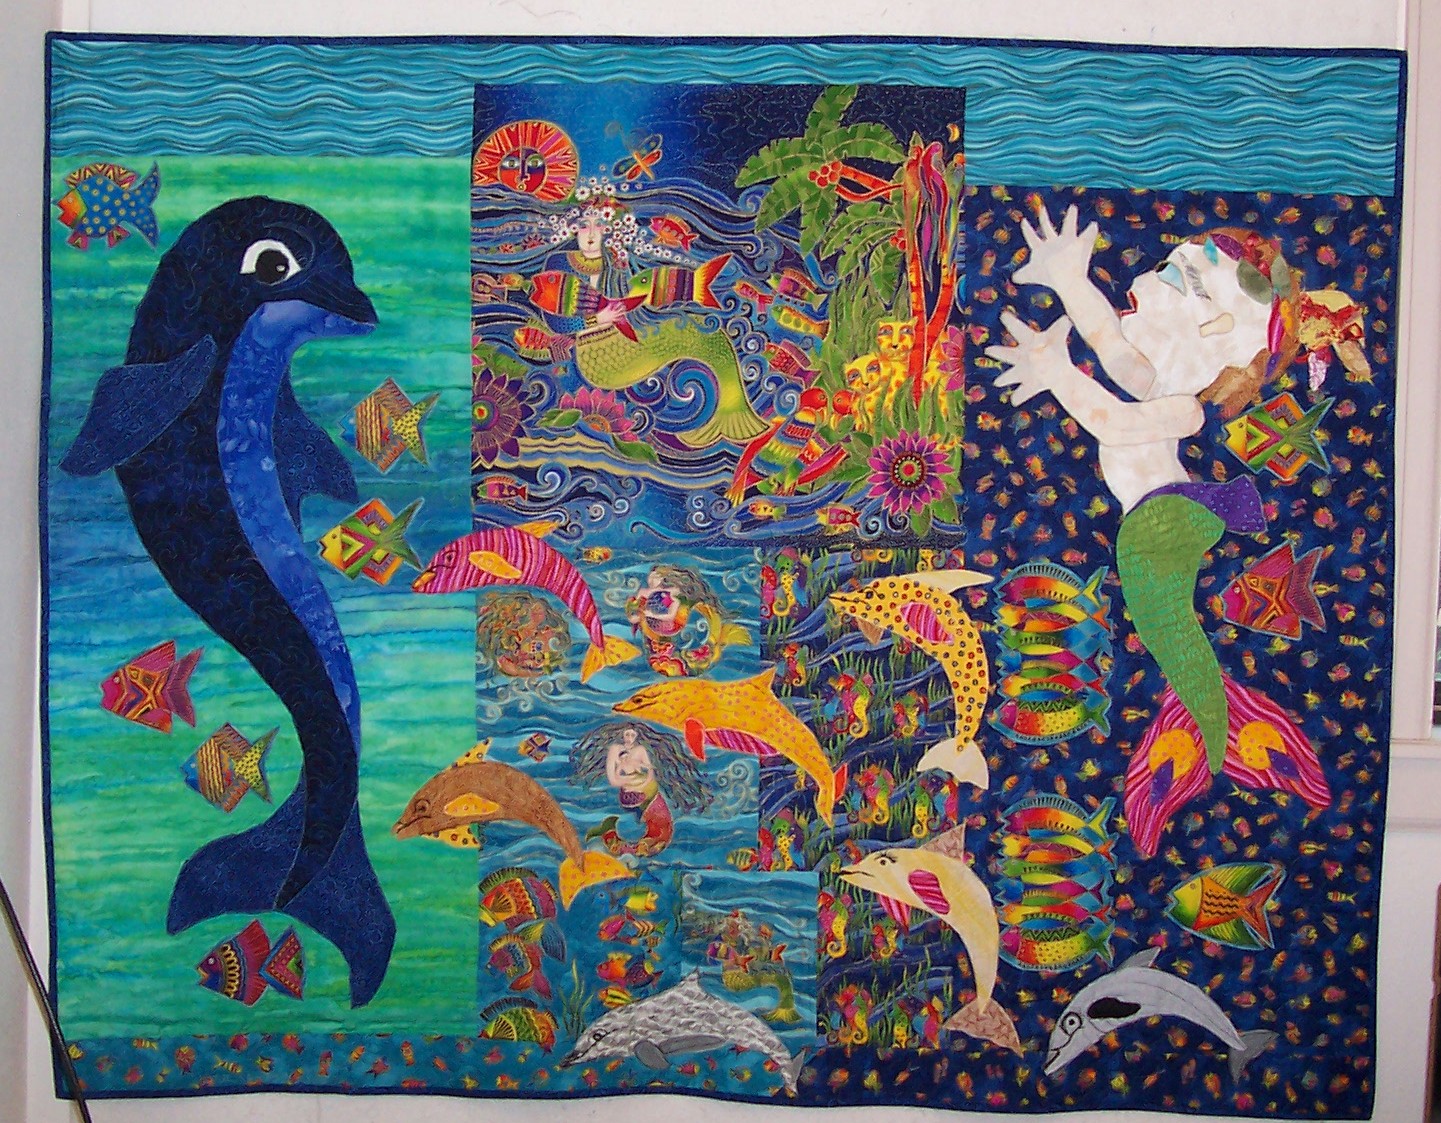 [Dolphins+and+mermaids+may+2005.jpg]